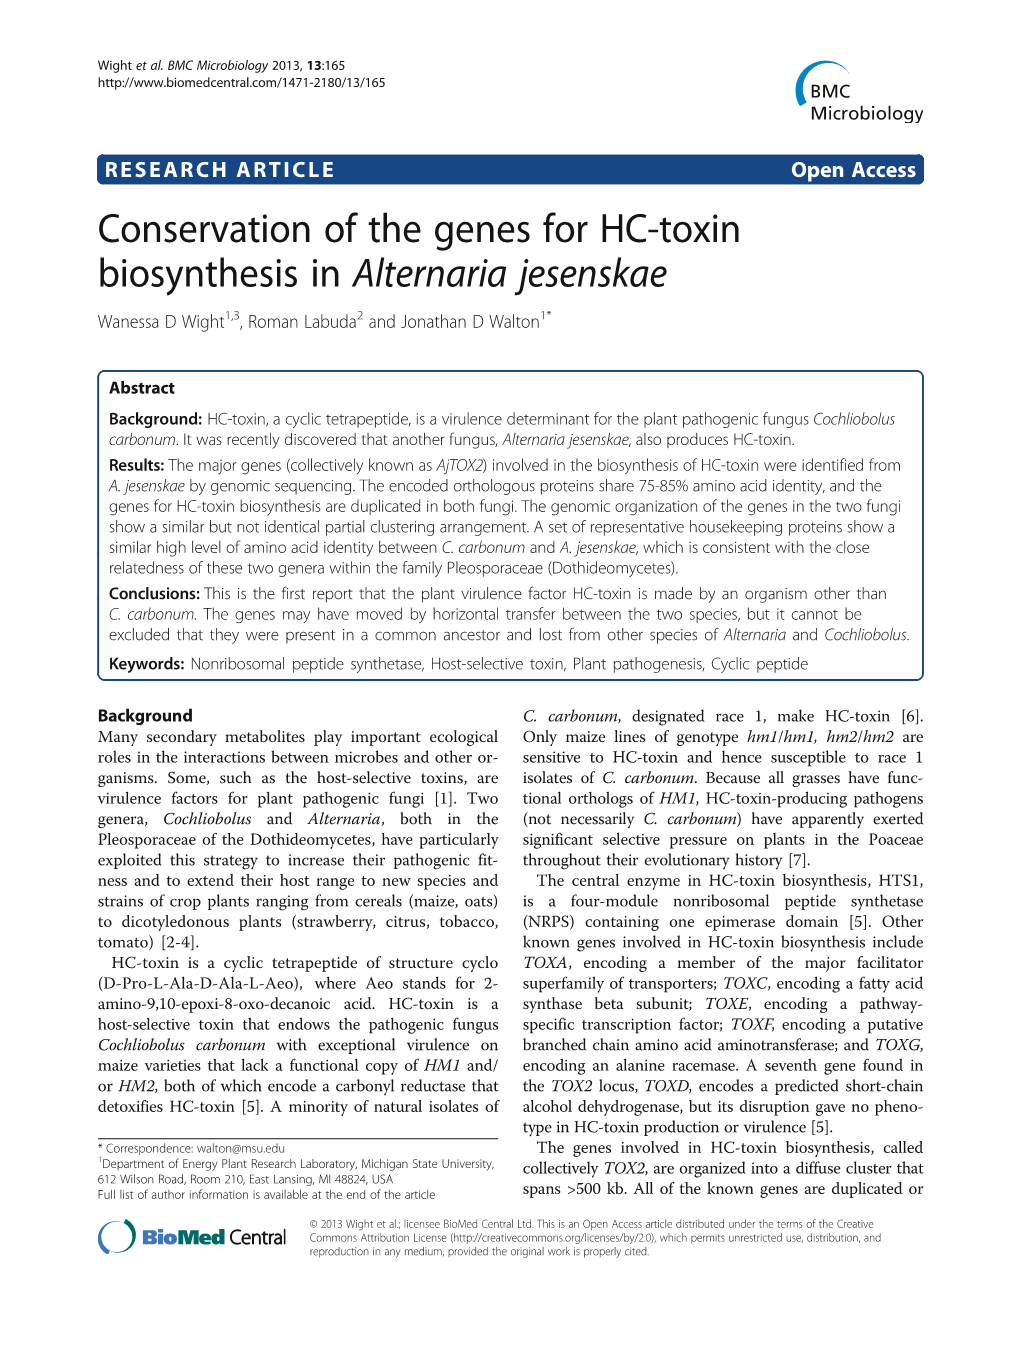 Conservation of the Genes for HC-Toxin Biosynthesis in Alternaria Jesenskae Wanessa D Wight1,3, Roman Labuda2 and Jonathan D Walton1*